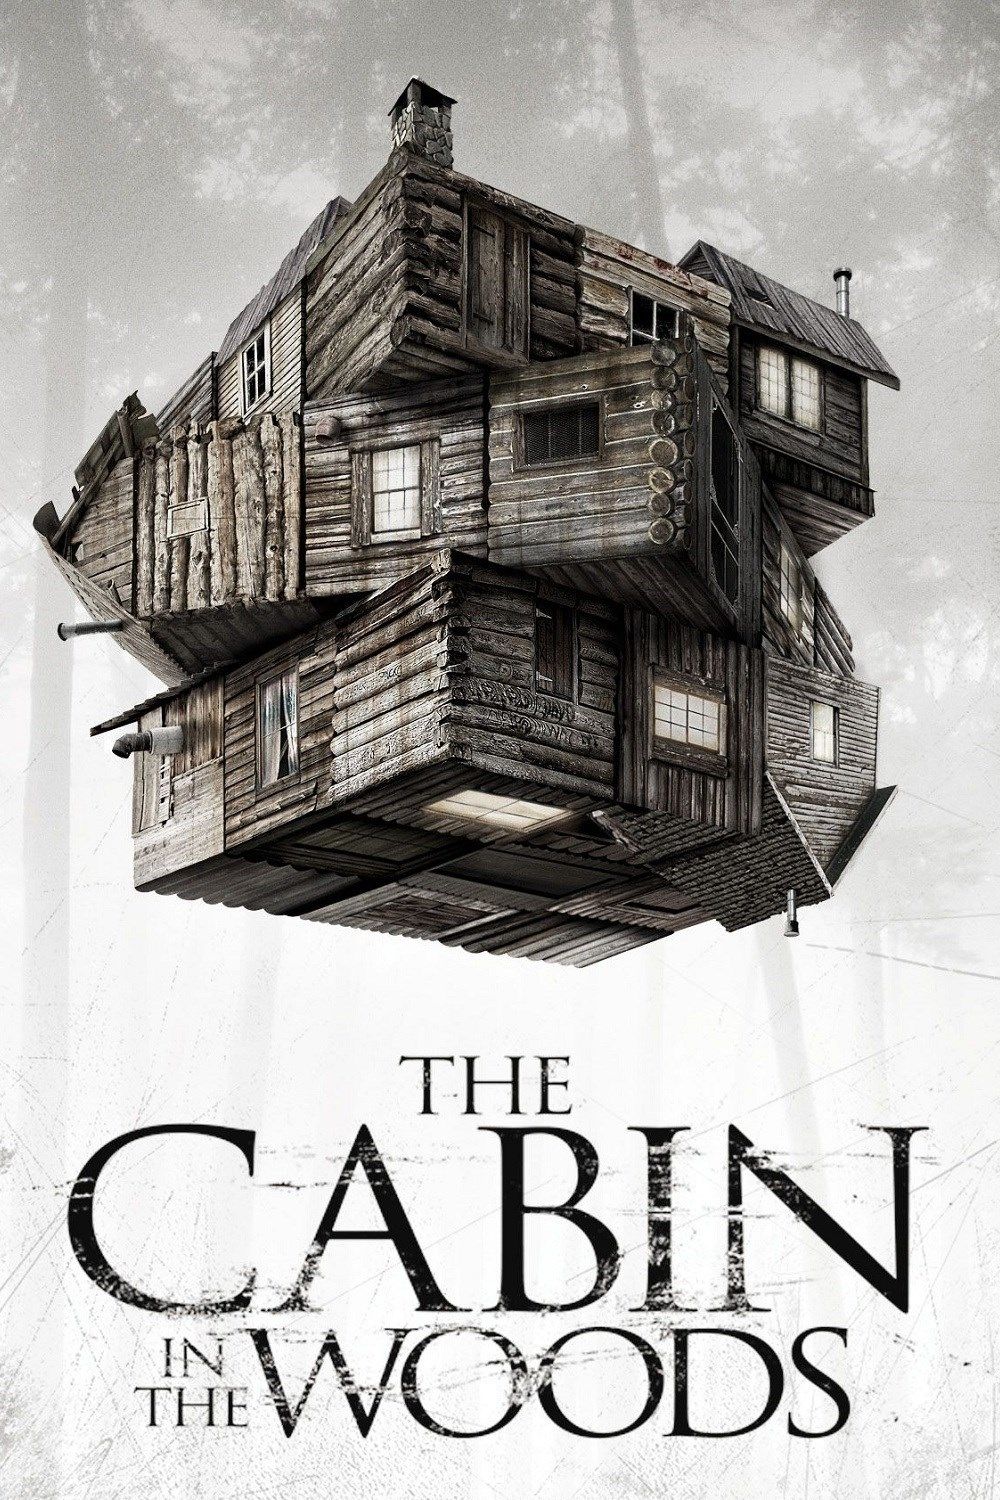 Oct 4: The Cabin in the Woods (2012)